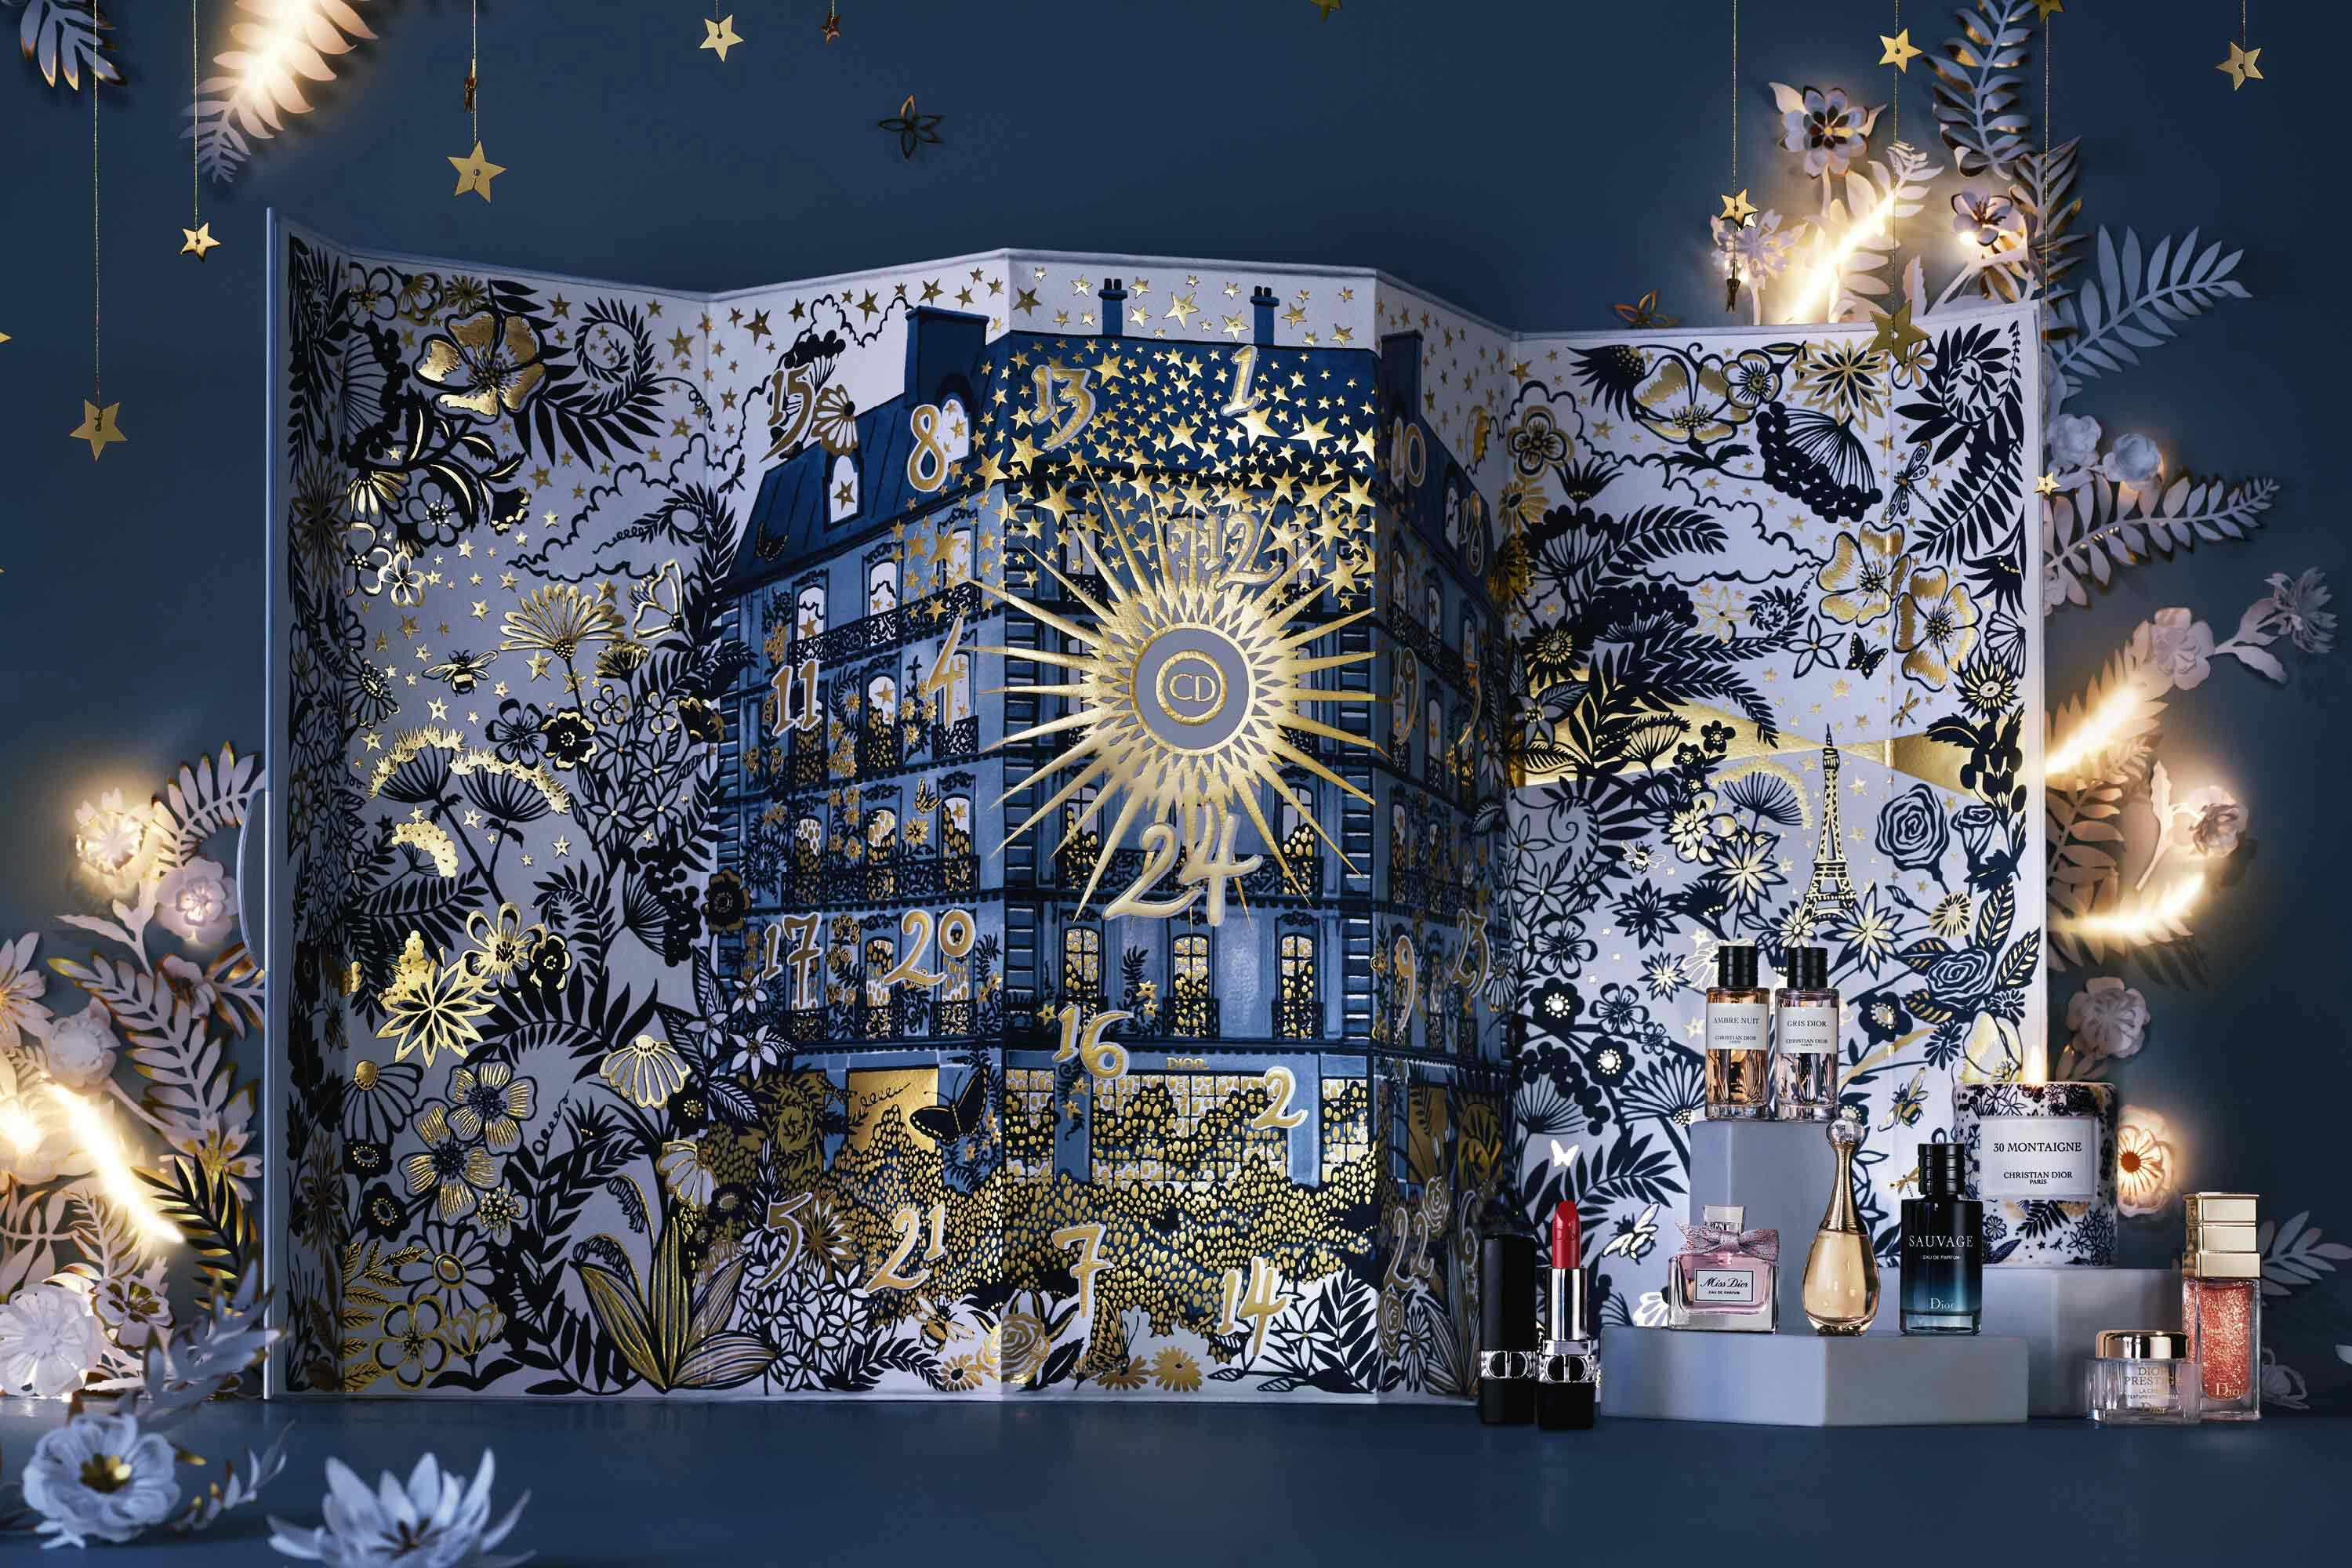 The Most *EXPENSIVE* DIOR Maison Advent Calendar - Is It Worth $520?! 🤯 